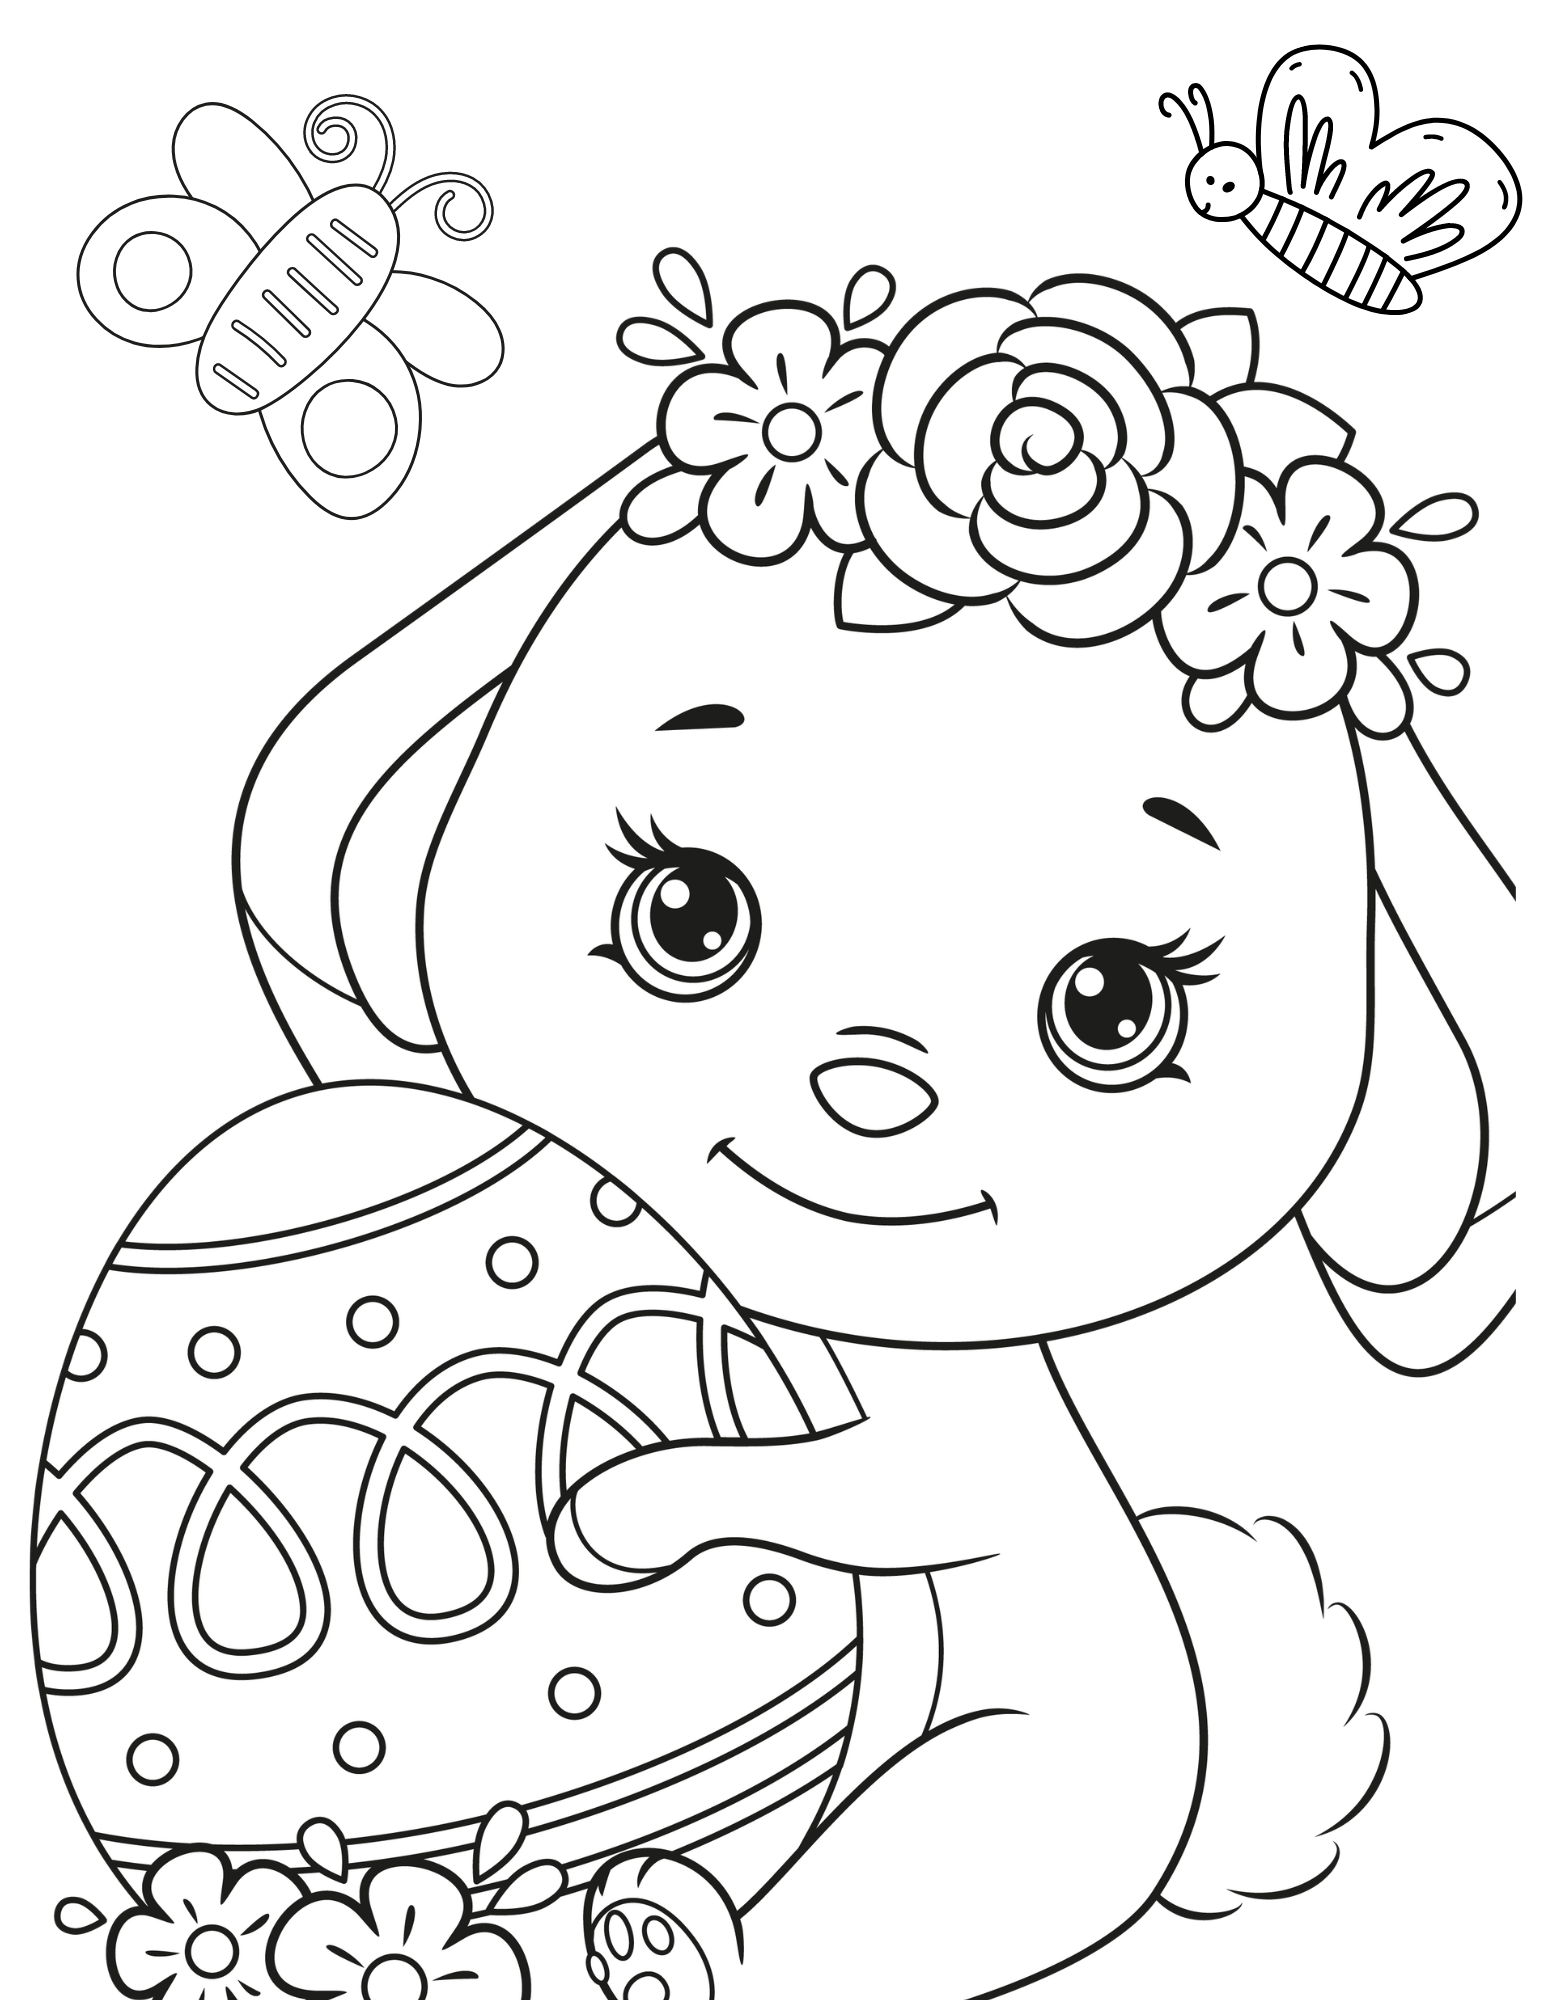 Cute spring coloring pages for kids and adults